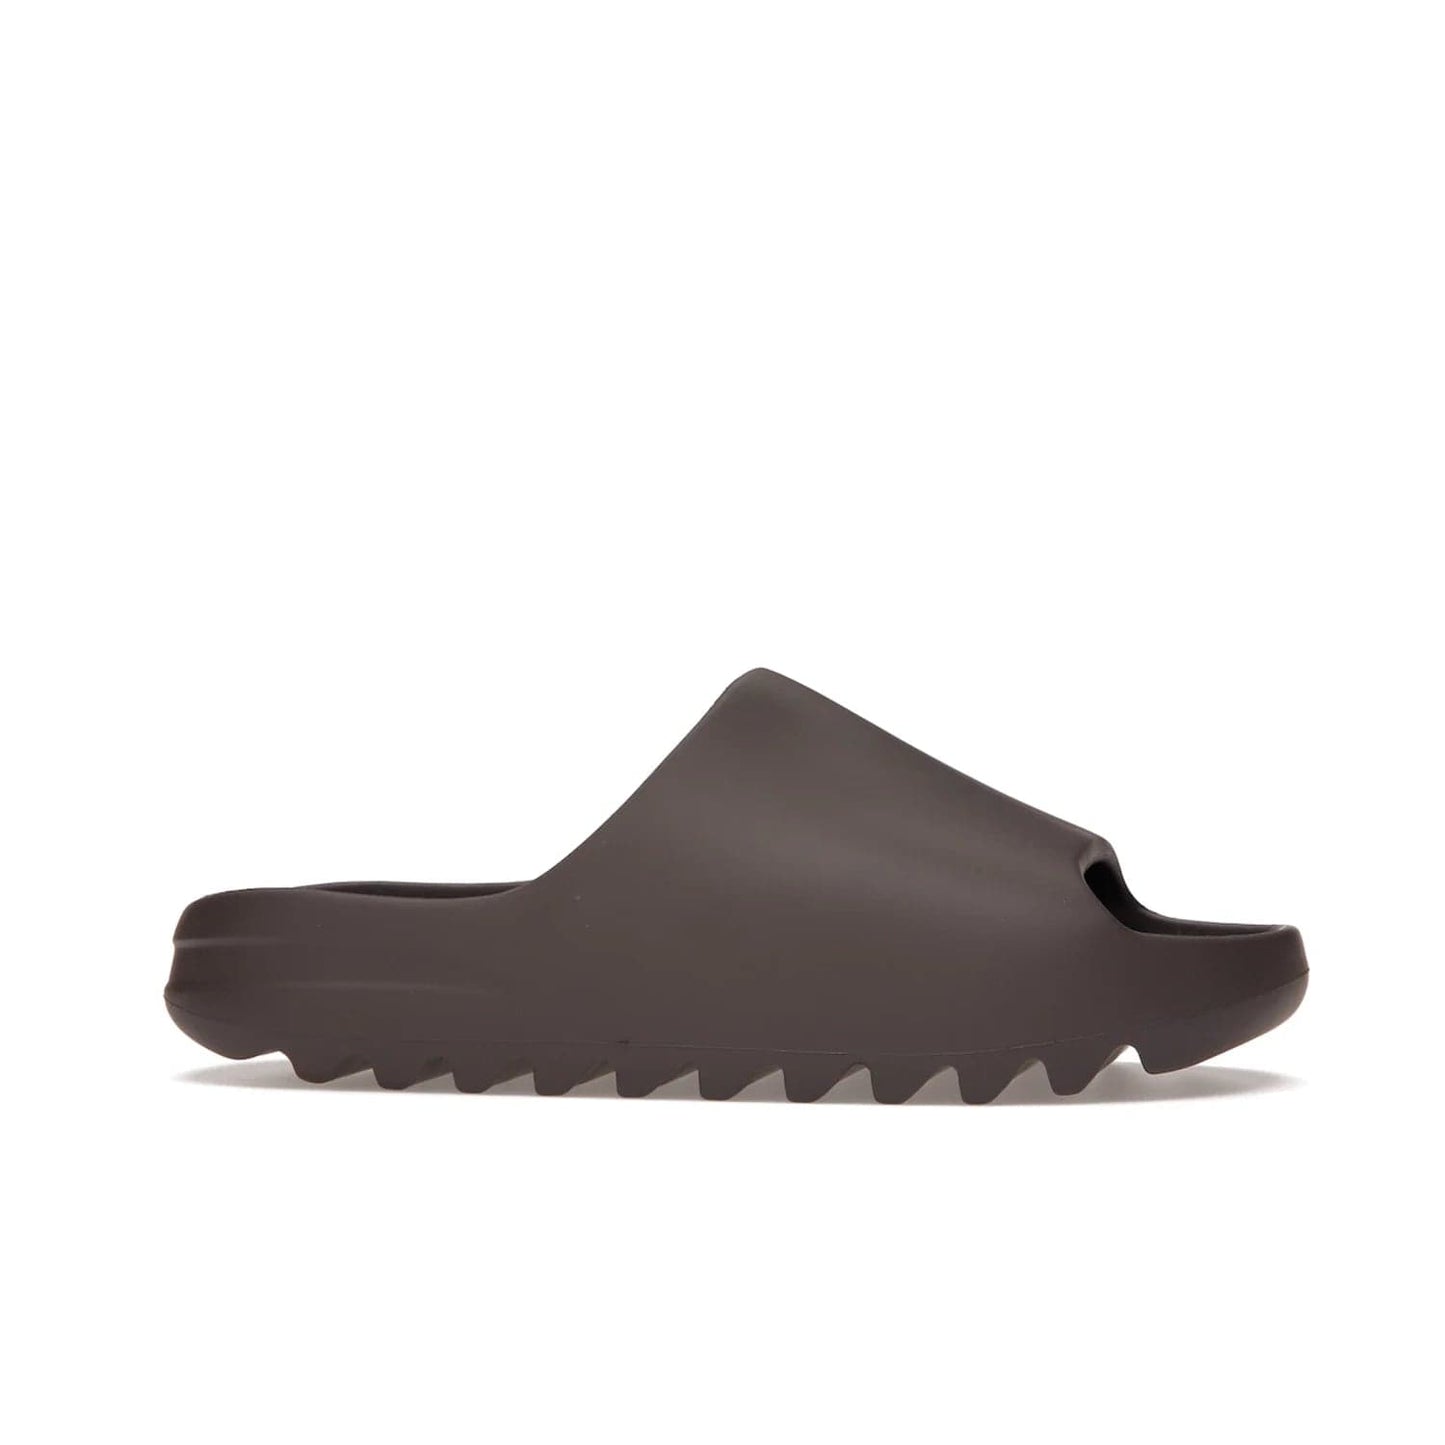 adidas Yeezy Slide Soot - Image 2 - Only at www.BallersClubKickz.com - Shop the Yeezy Slide Soot sneaker by Adidas, a sleek blend of form and function. Monochrome silhouette in Soot/Soot/Soot. Lightweight EVA foam offers comfort and durability. Get the must-have style today.